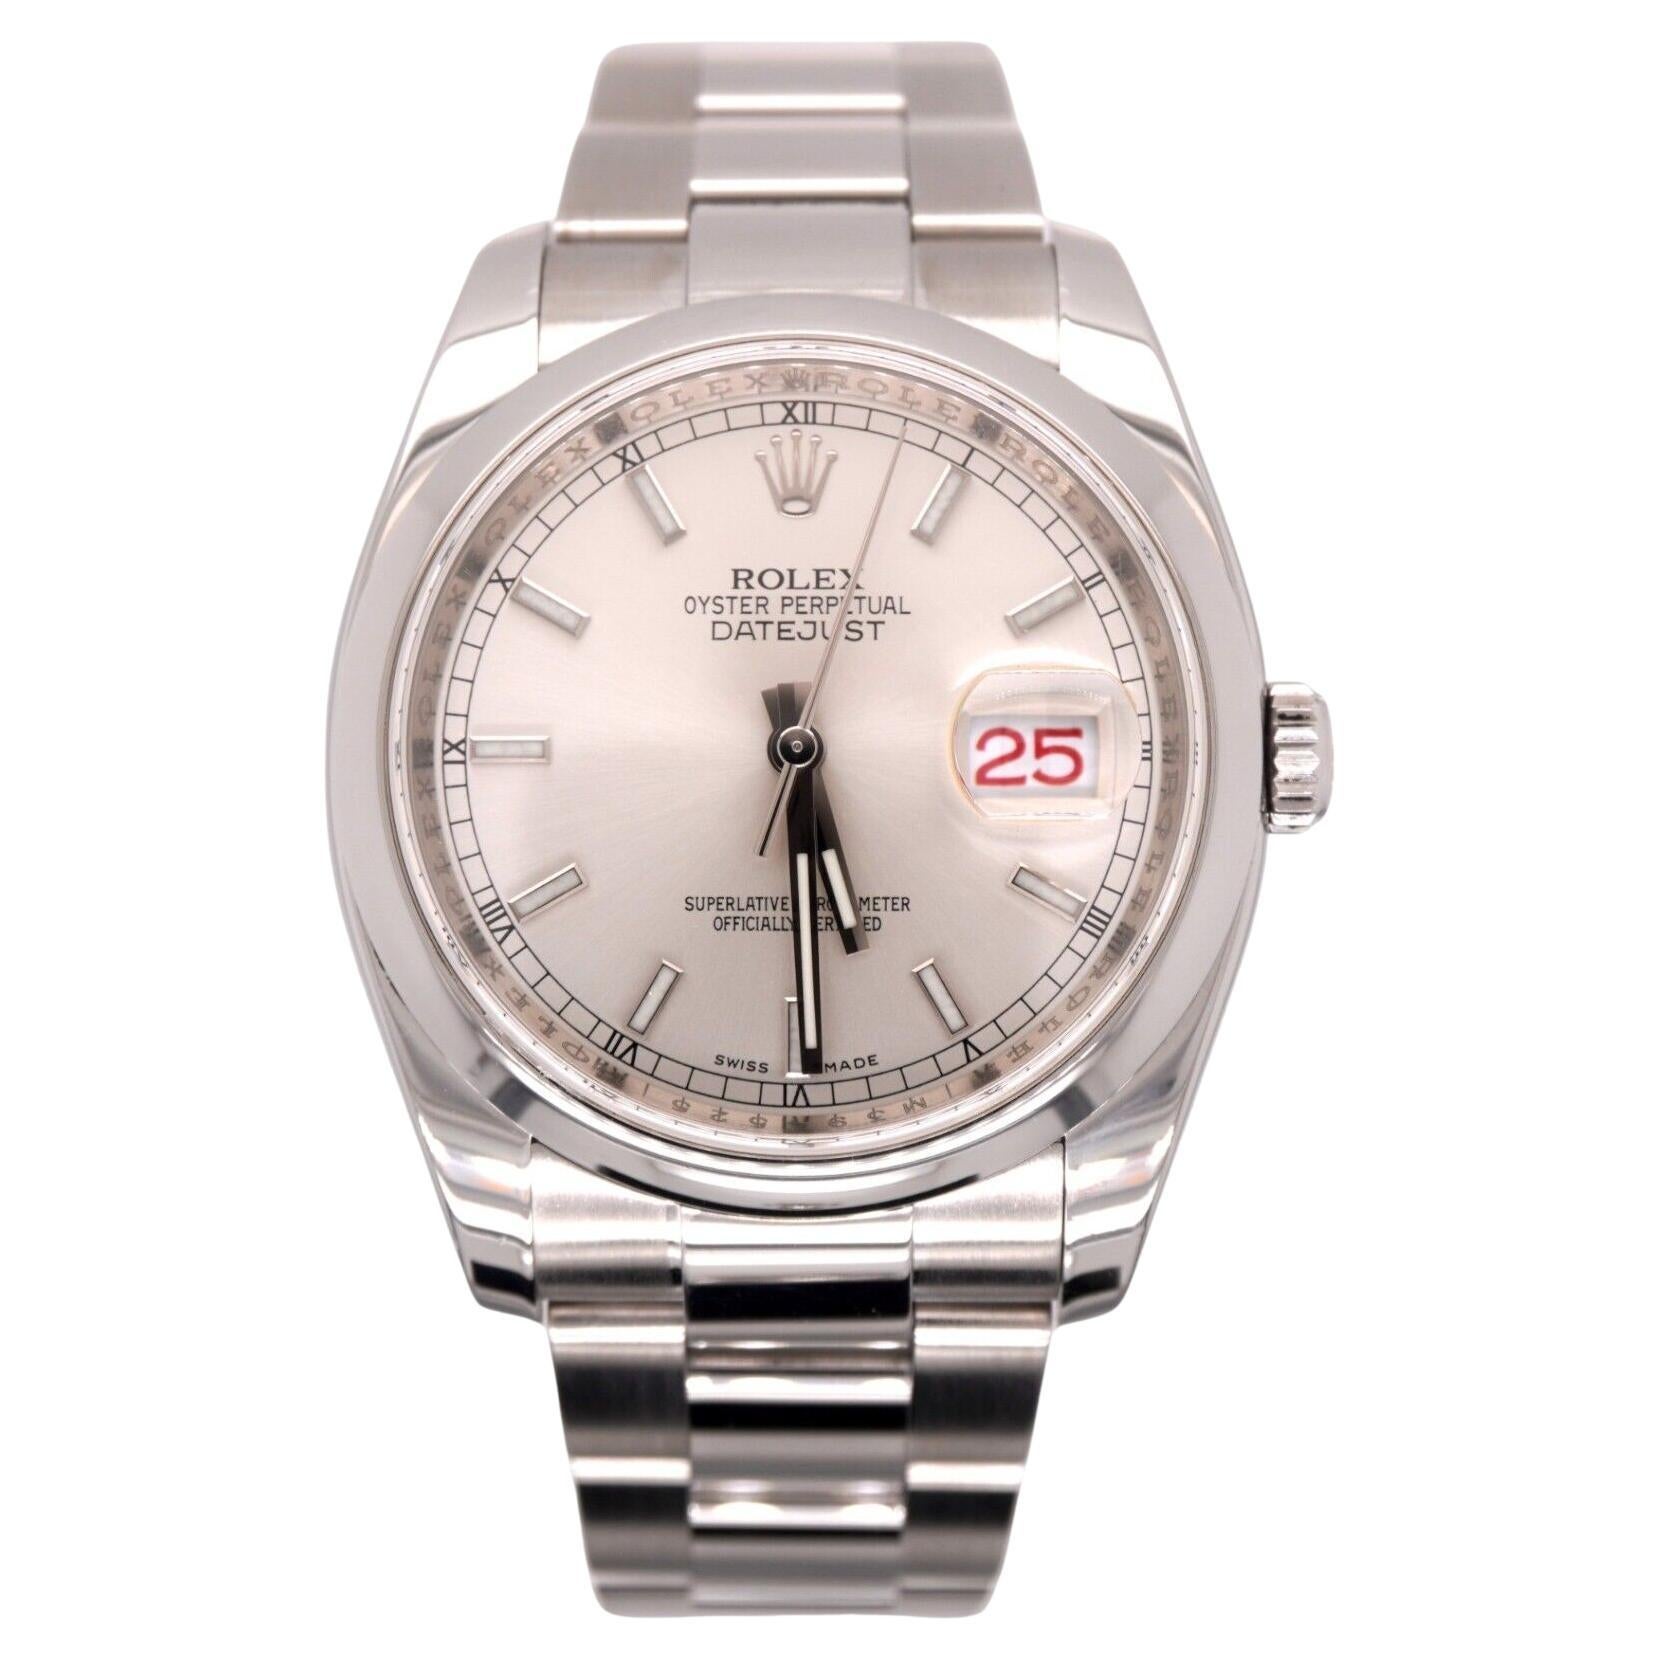 Rolex Datejust 36mm Mens Stainless Steel Oyster Silver Dial Watch Ref: 116200